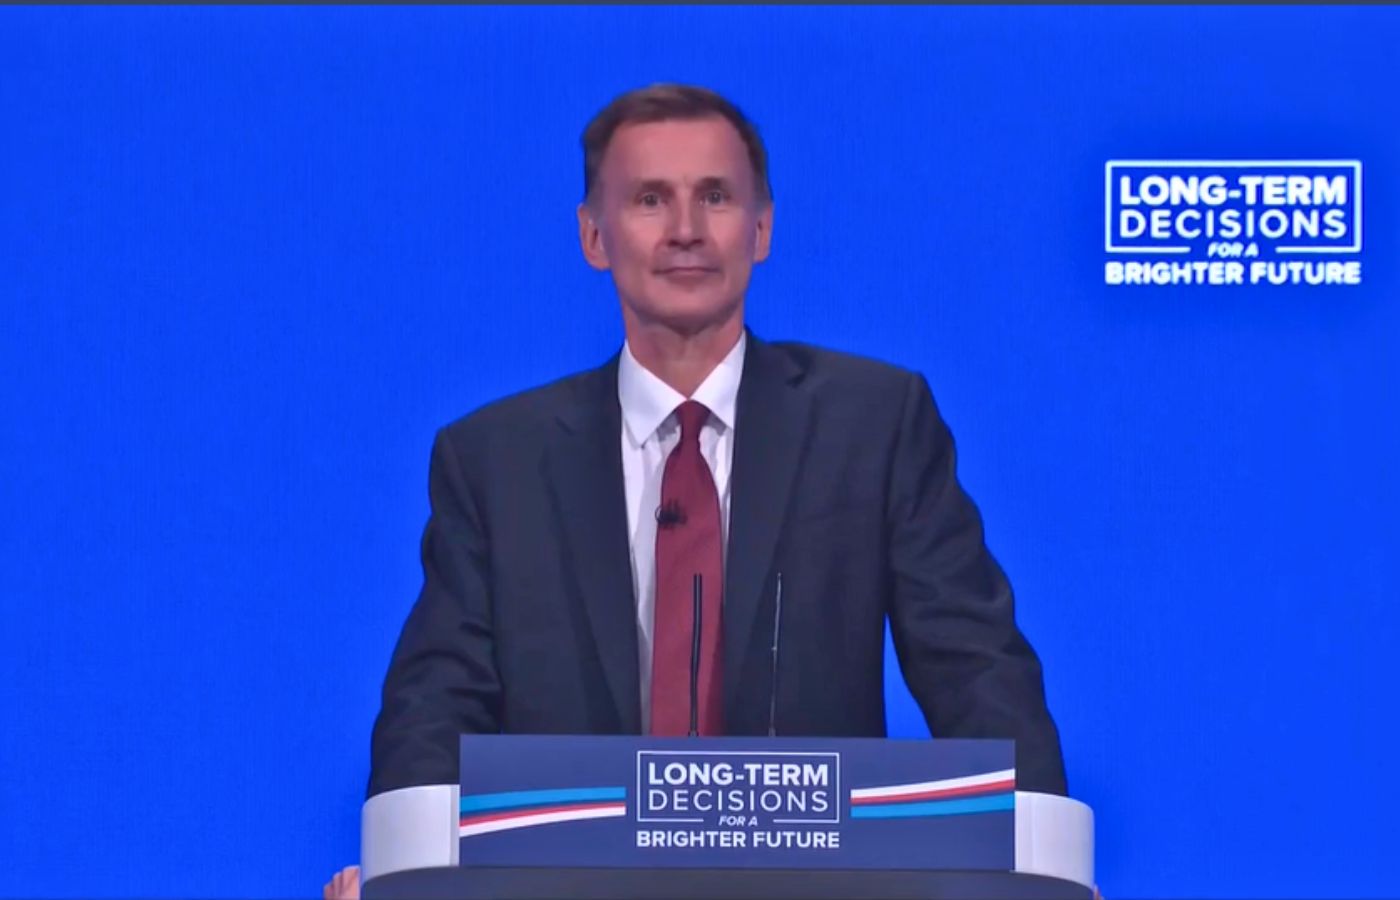 Jeremy Hunt said the UK Government will have another look at the benefit sanctions system.